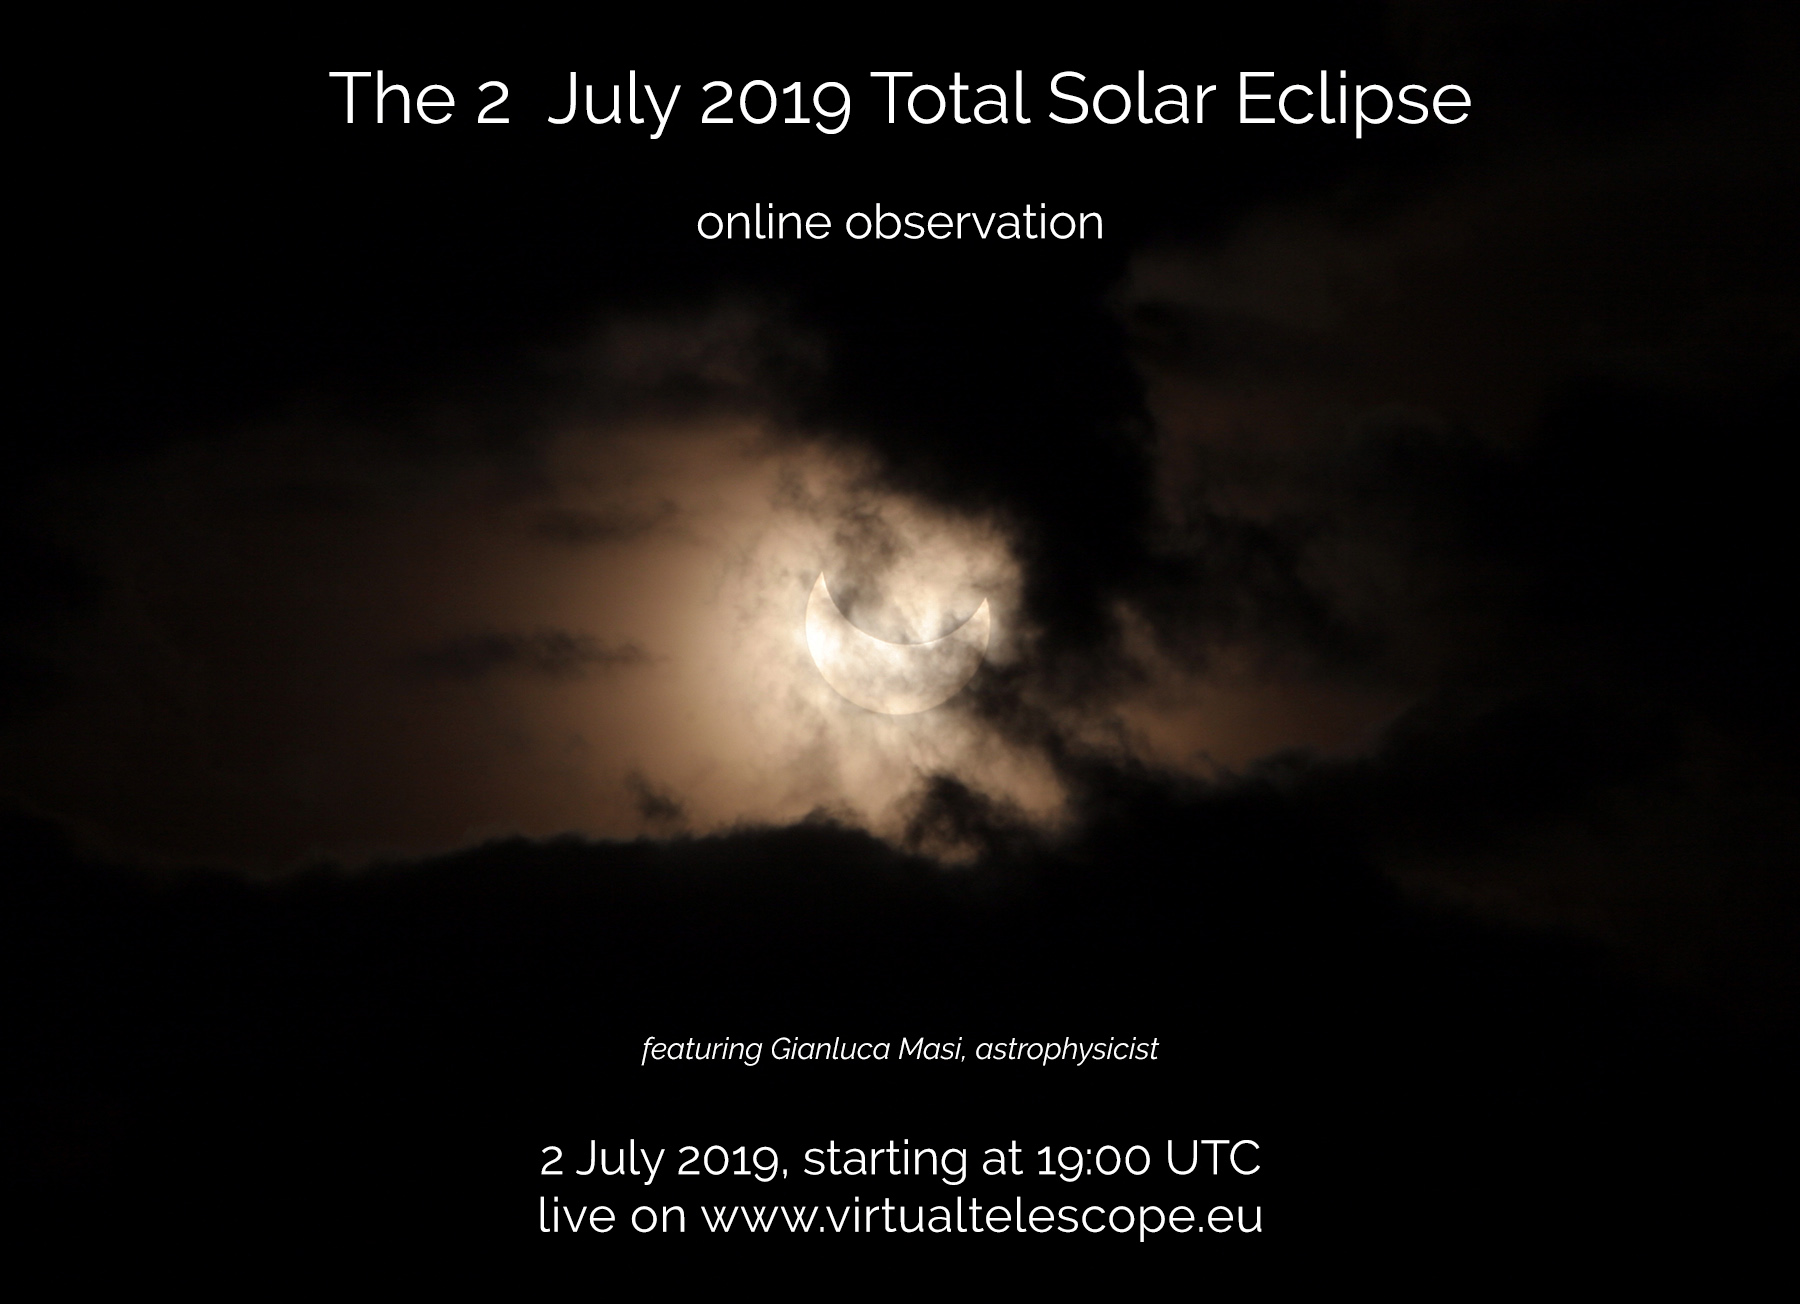 The 2 July 2019 total solar eclipse: poster of the event